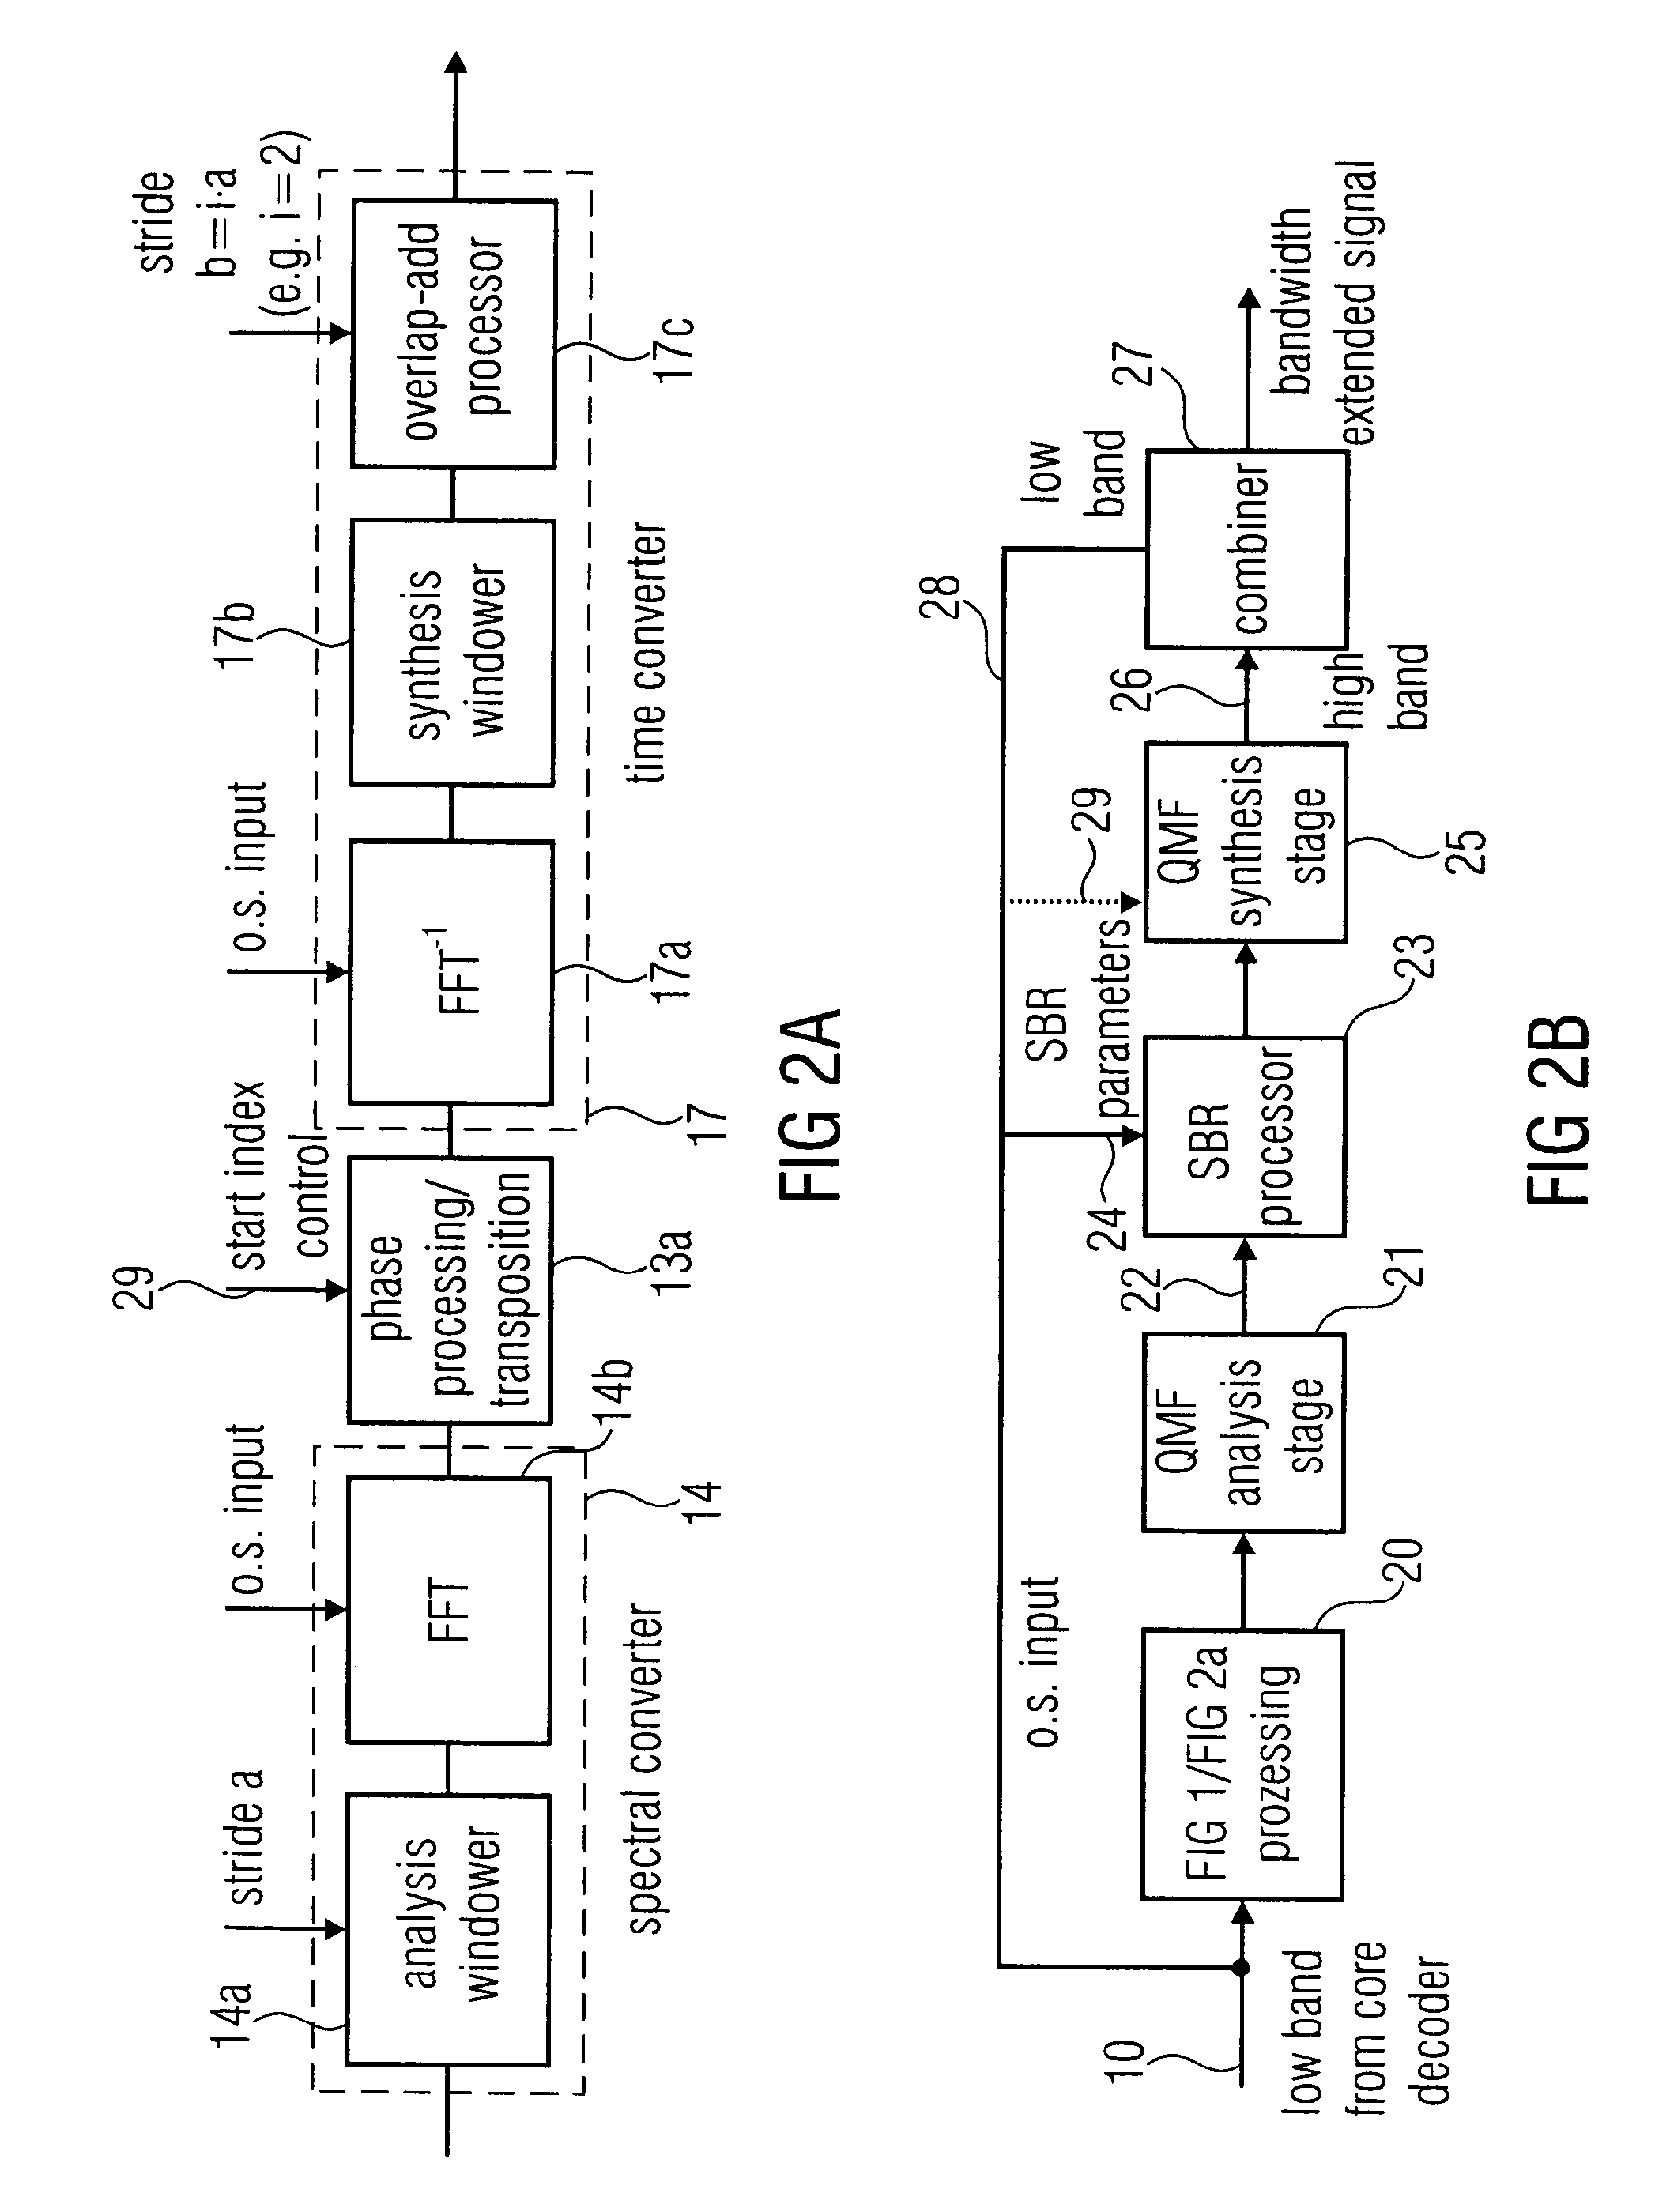 Apparatus and method for generating a high frequency audio signal using adaptive oversampling